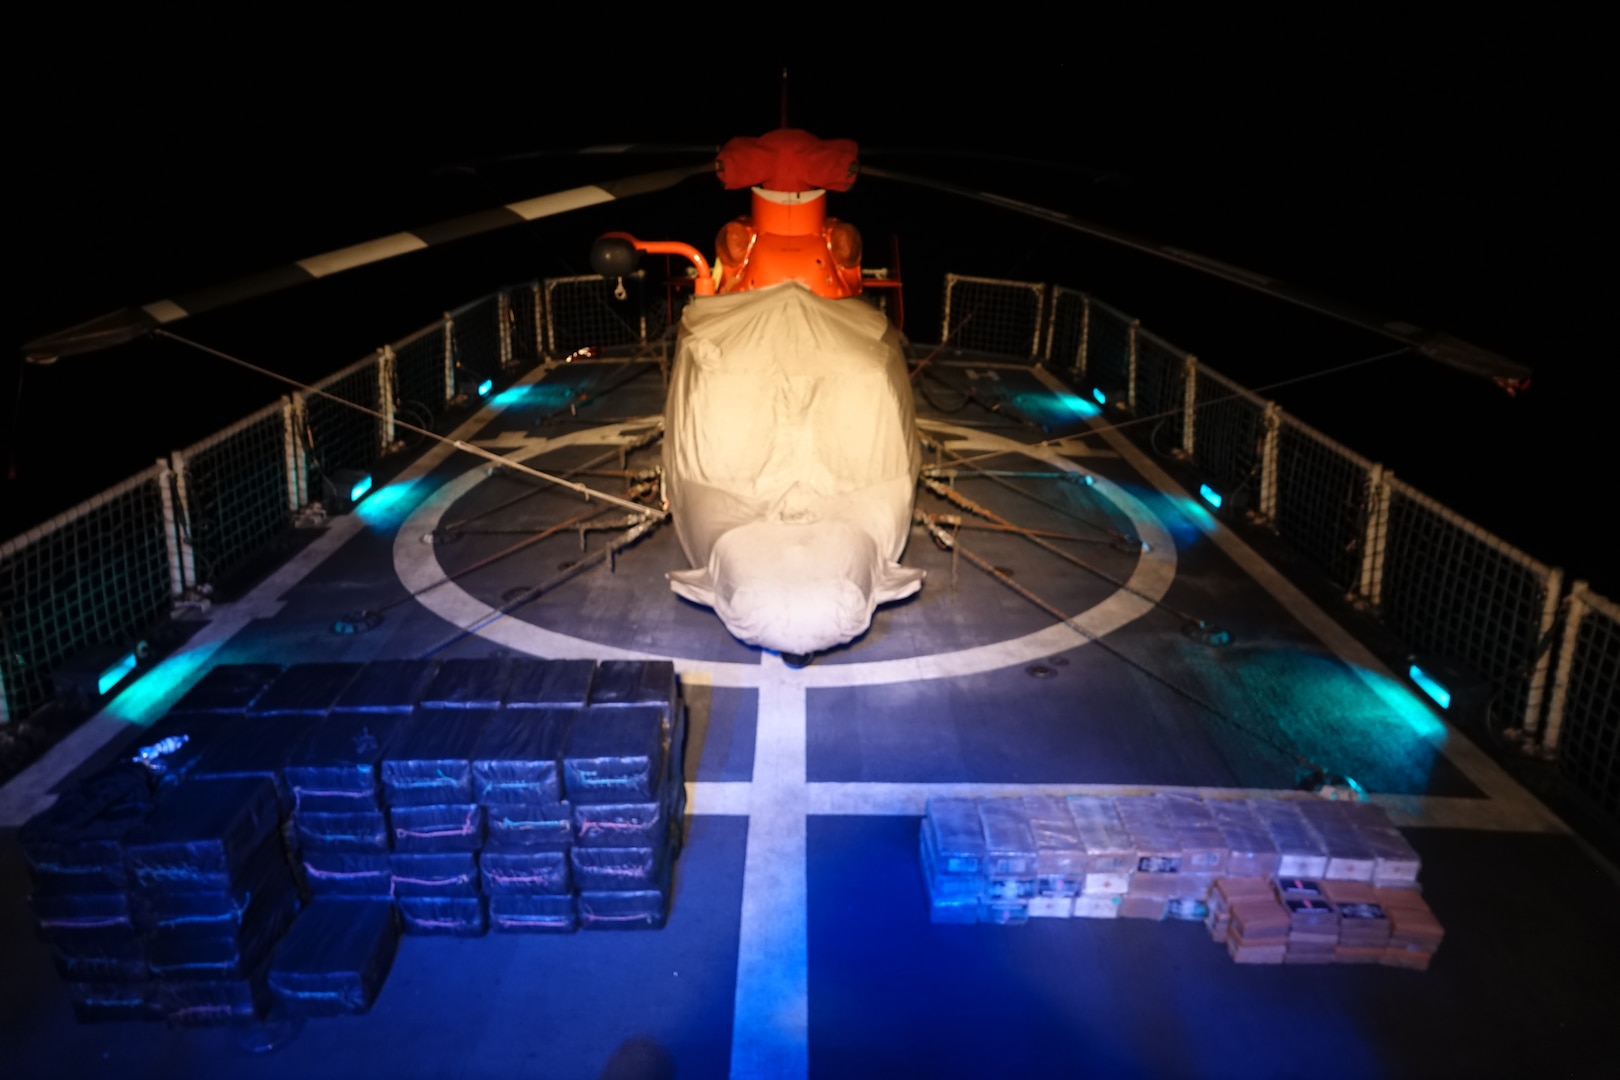 Approximately 2,600 kilograms cocaine are displayed on the deck of the Coast Guard Cutter Alert (WMEC 630) while underway in the Eastern Pacific Ocean May 26, 2023. The Coast Guard employs Helicopter Interdiction Tactical Squadron MH-65 Dolphin helicopters and aircrews to locate and stop non-compliant suspected drug smuggling vessels. (U.S. Coast Guard photo by Petty Officer 2nd Class Hannah Peterman)